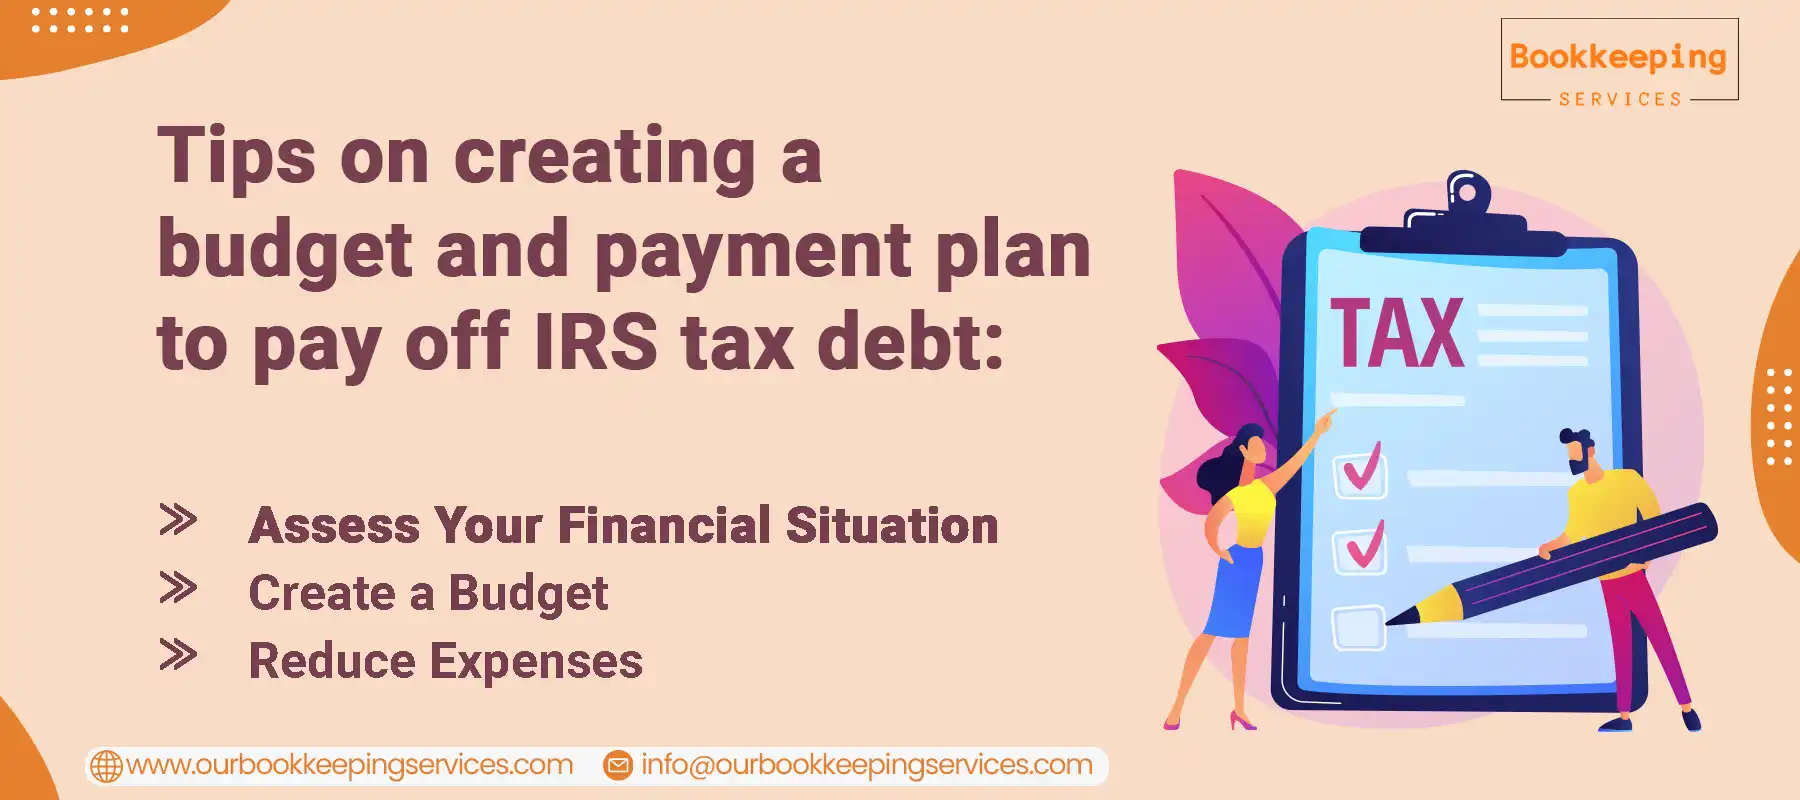 Tips on creating a budget and payment plan to pay off IRS tax debt